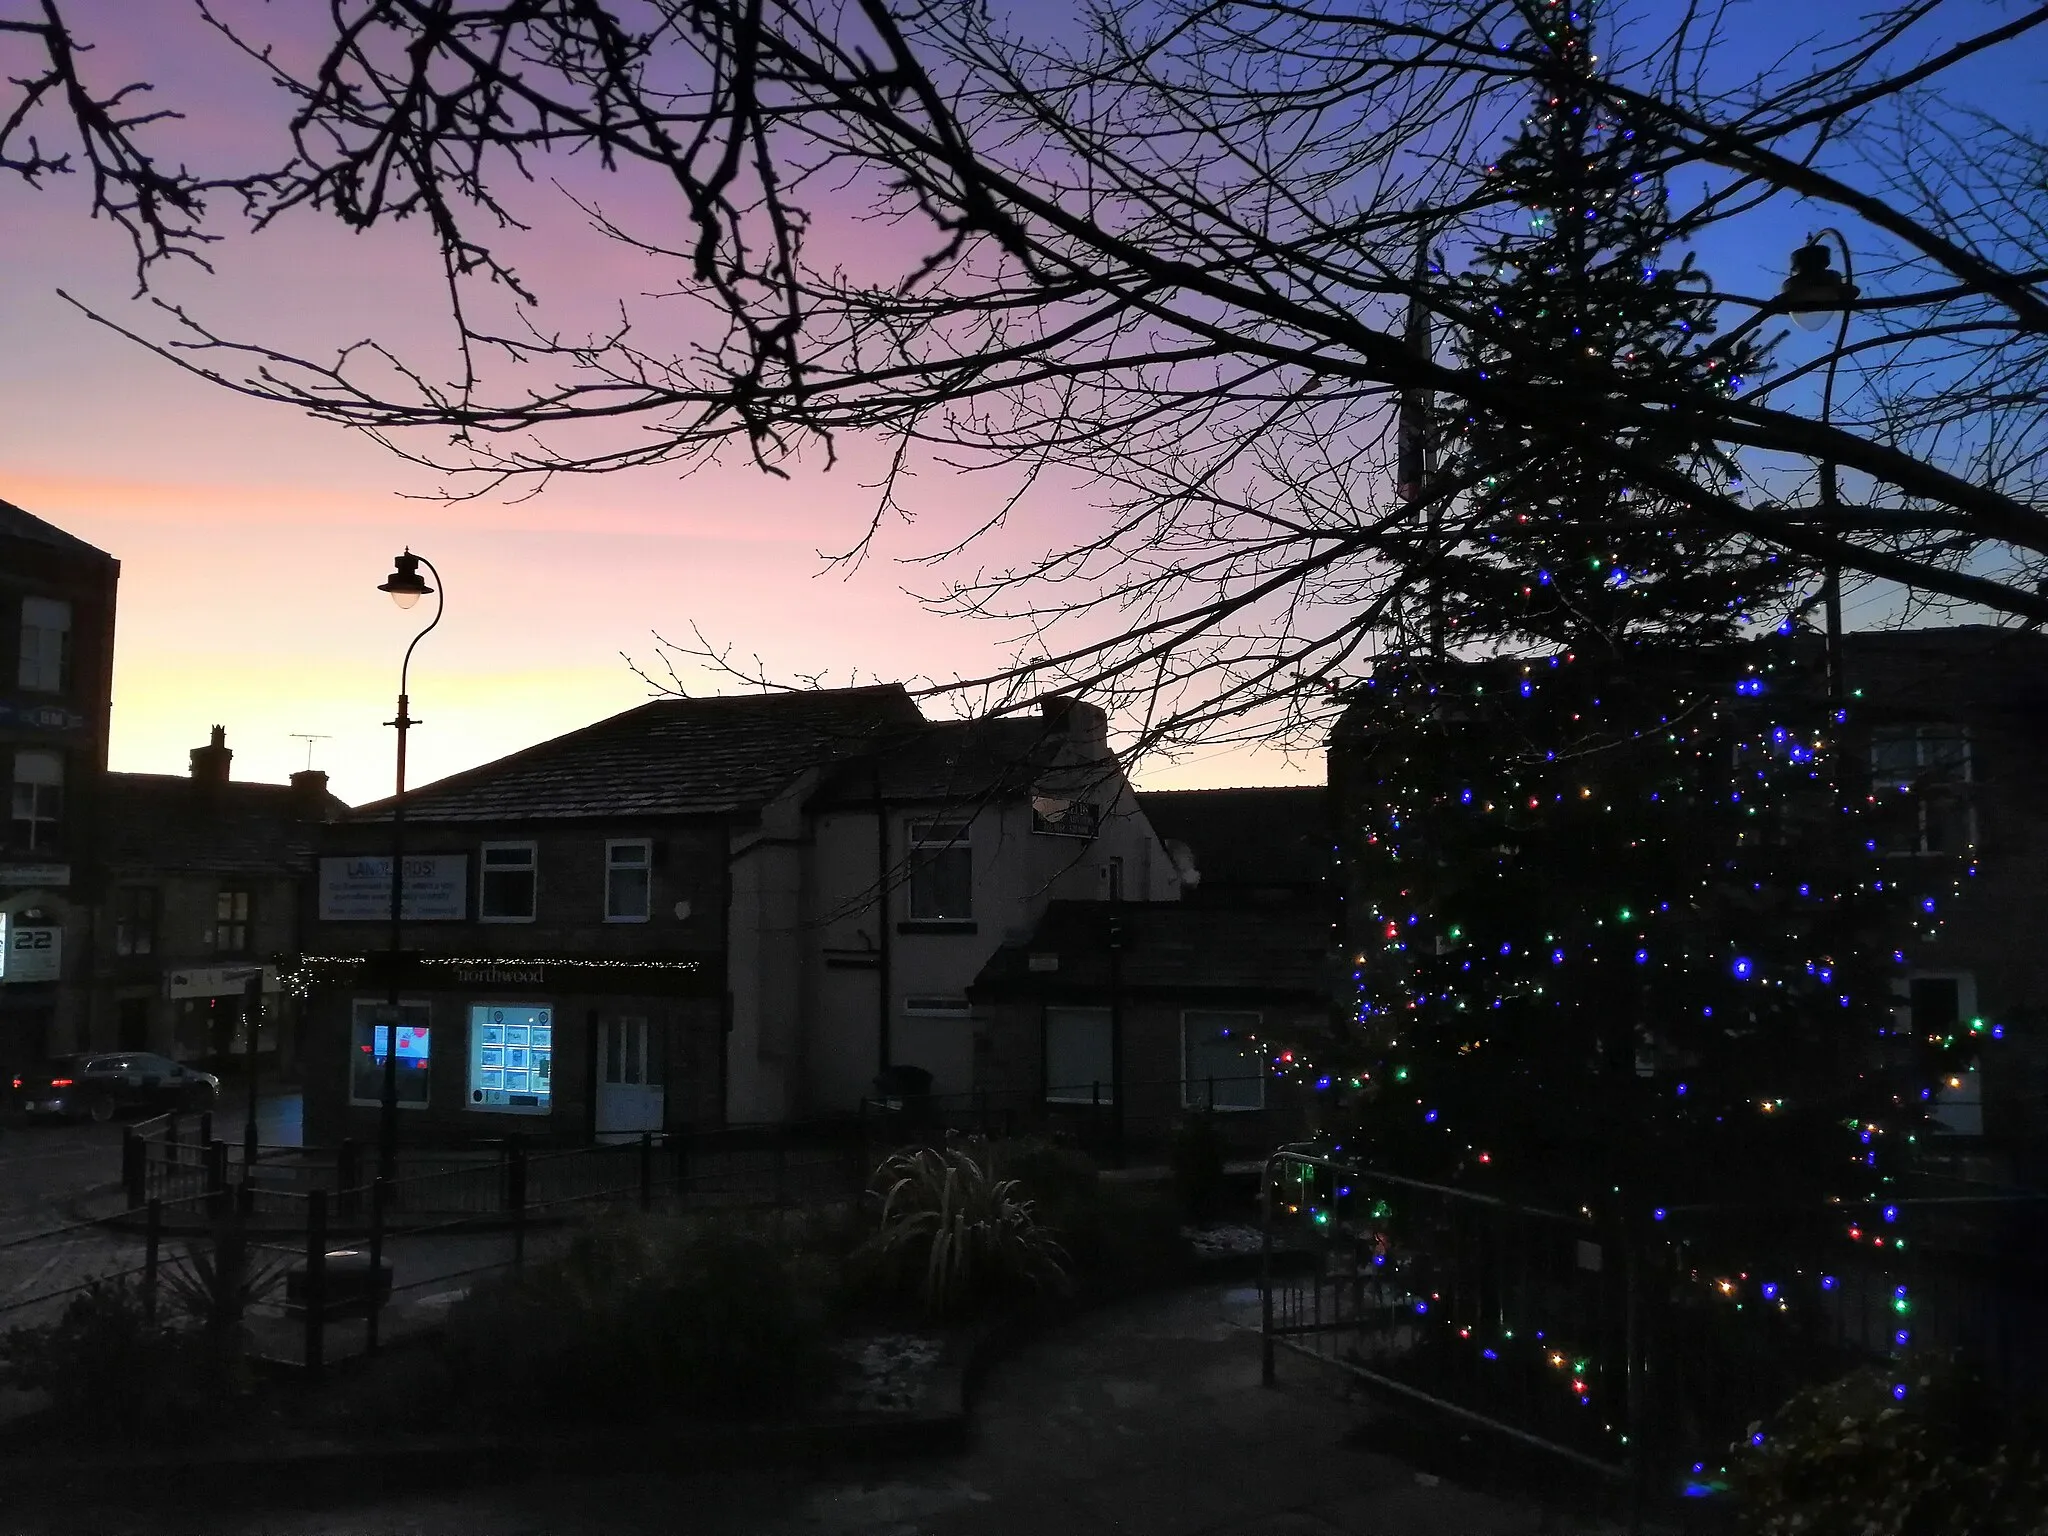 Photo showing: Christmas tree in lees square with a purple sky